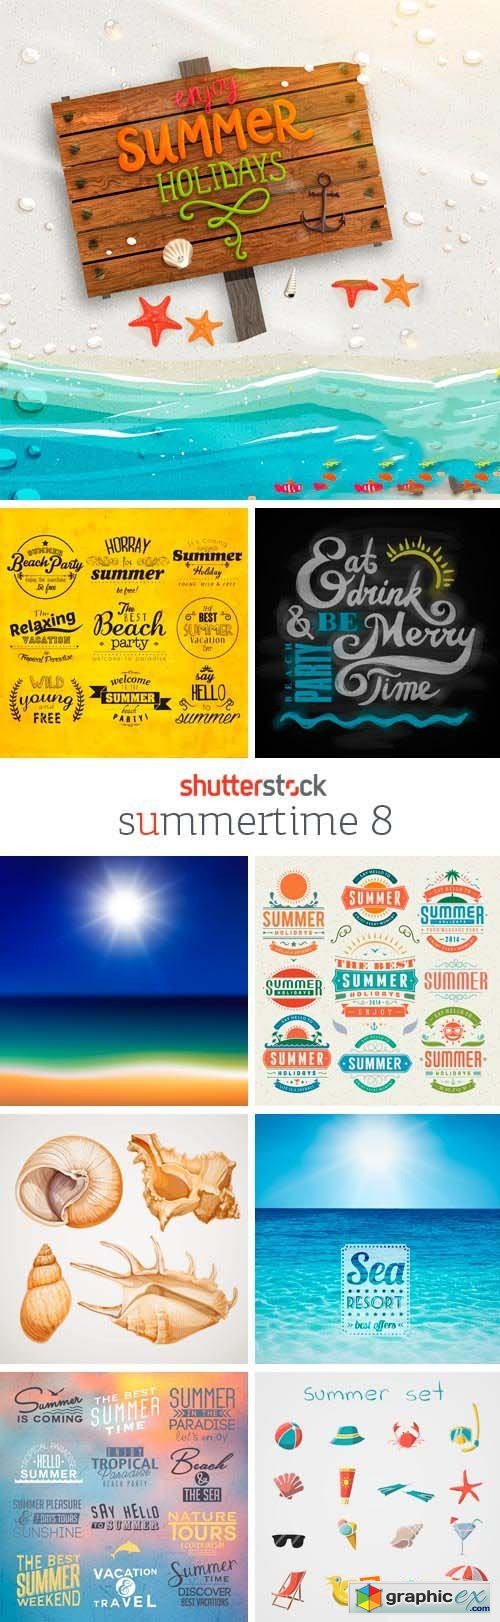 Amazing SS - Summertime 8, 25xEPS